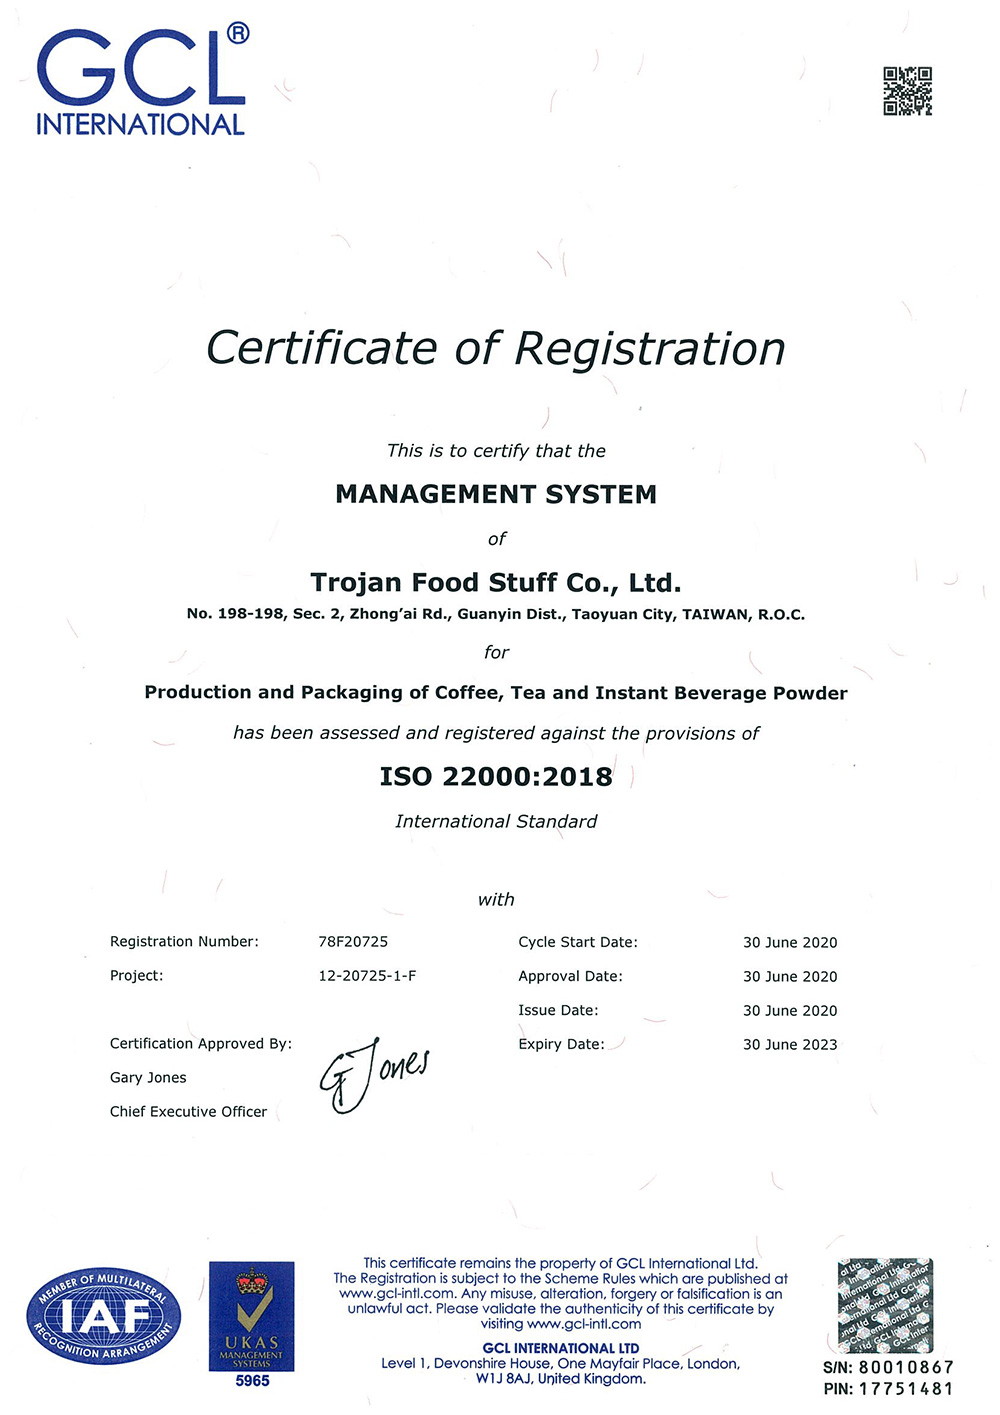 Trojan acquired ISO-22000 certificated in 2019.